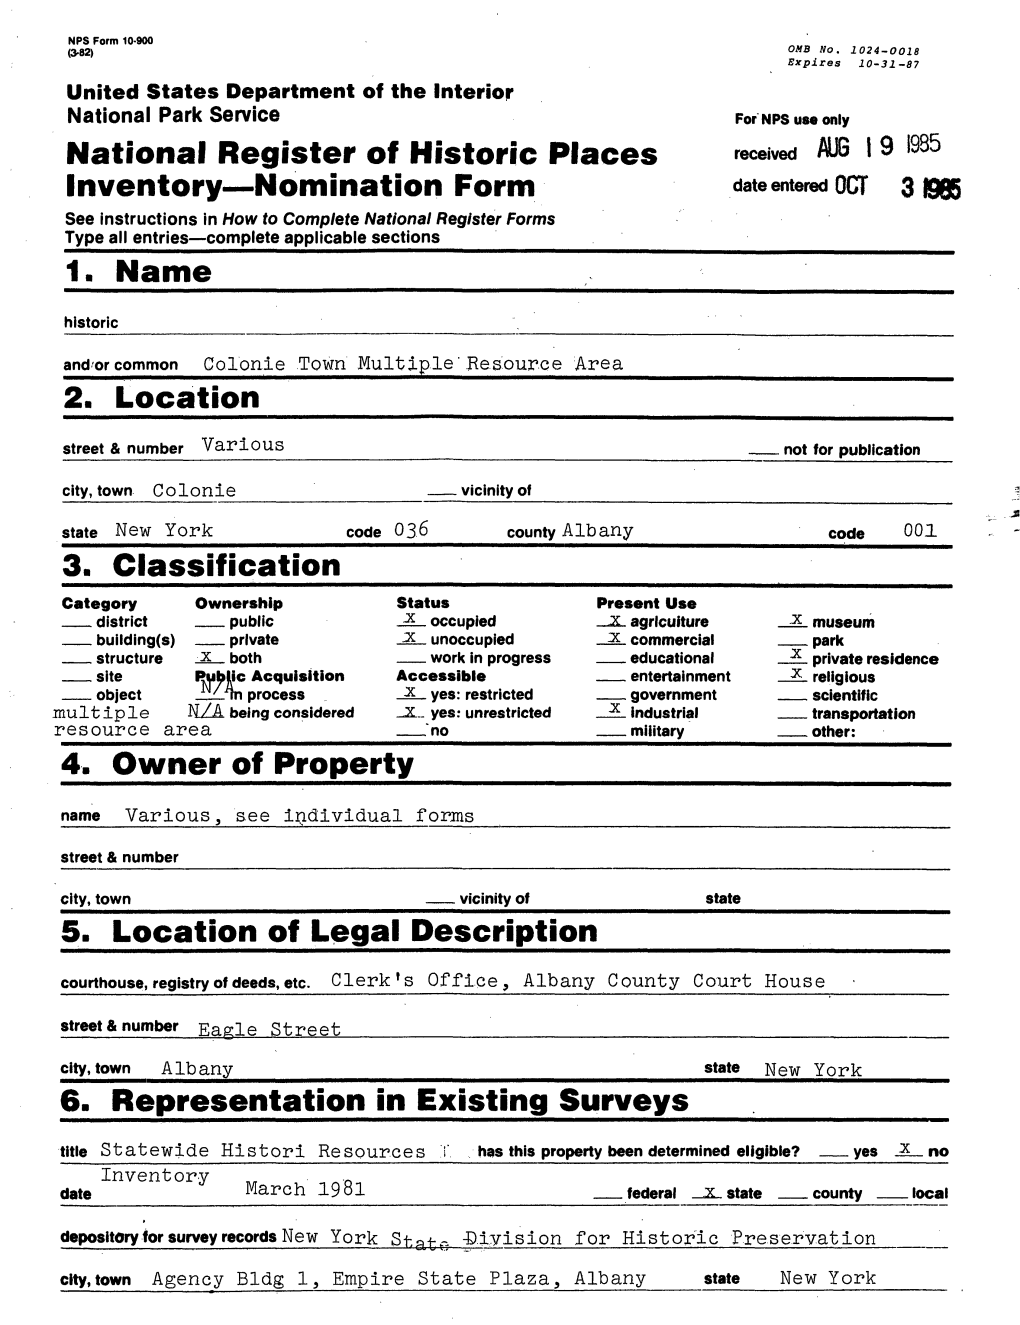 Colonie Town Multiple Resource Area Continuation Sheet Albany Co